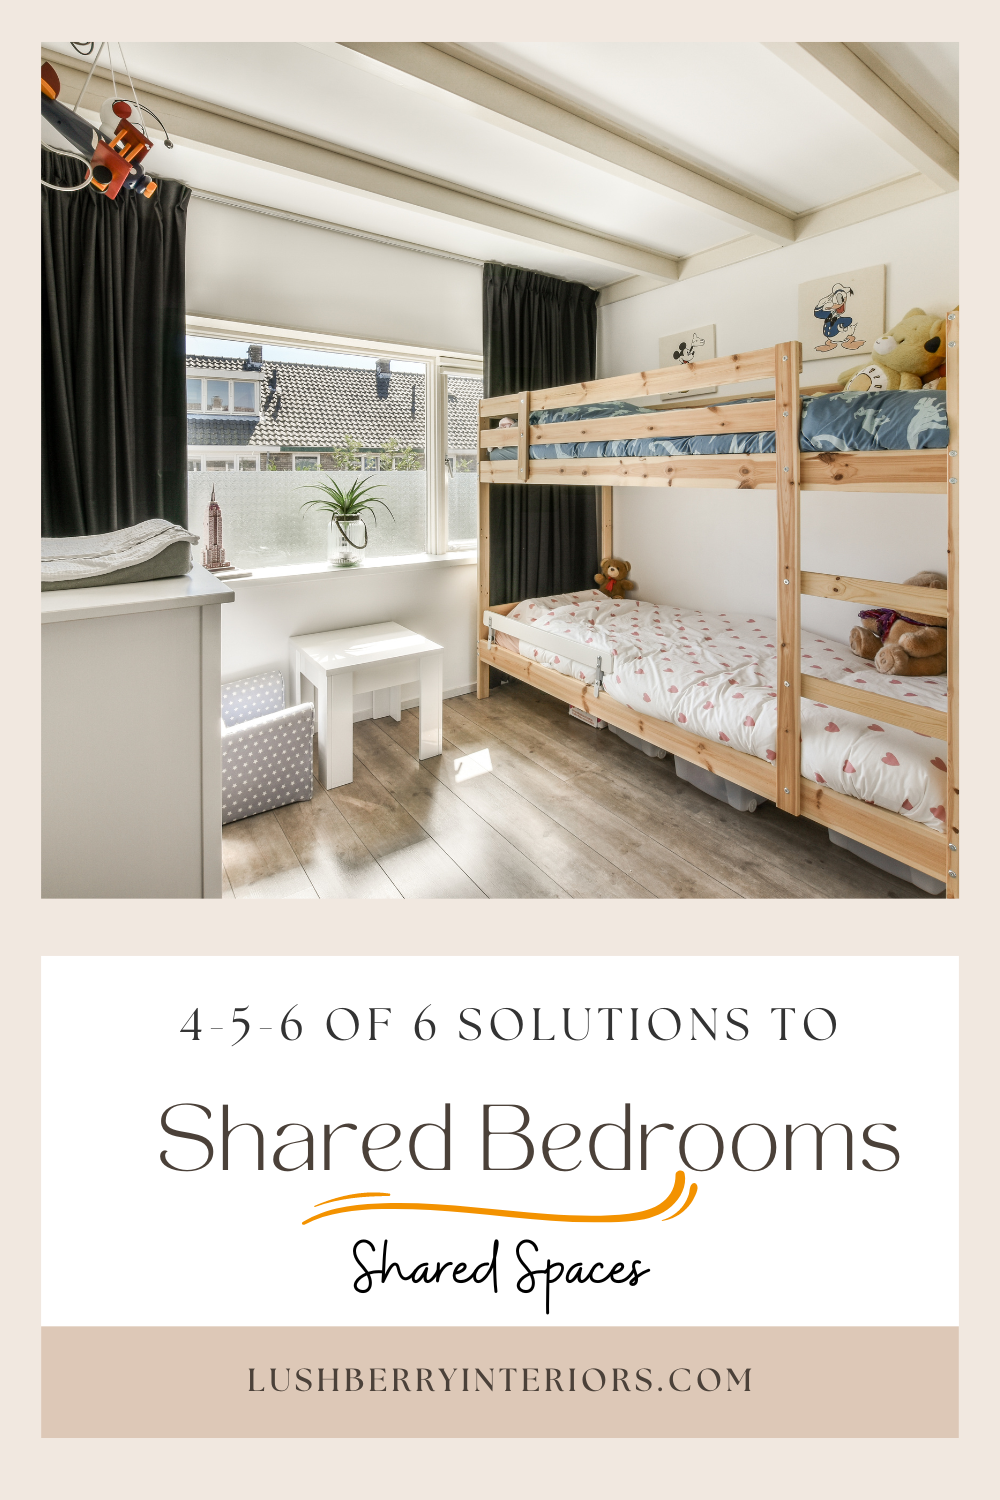 Shared Bedrooms in Kids Spaces - 4-5-6 solutions